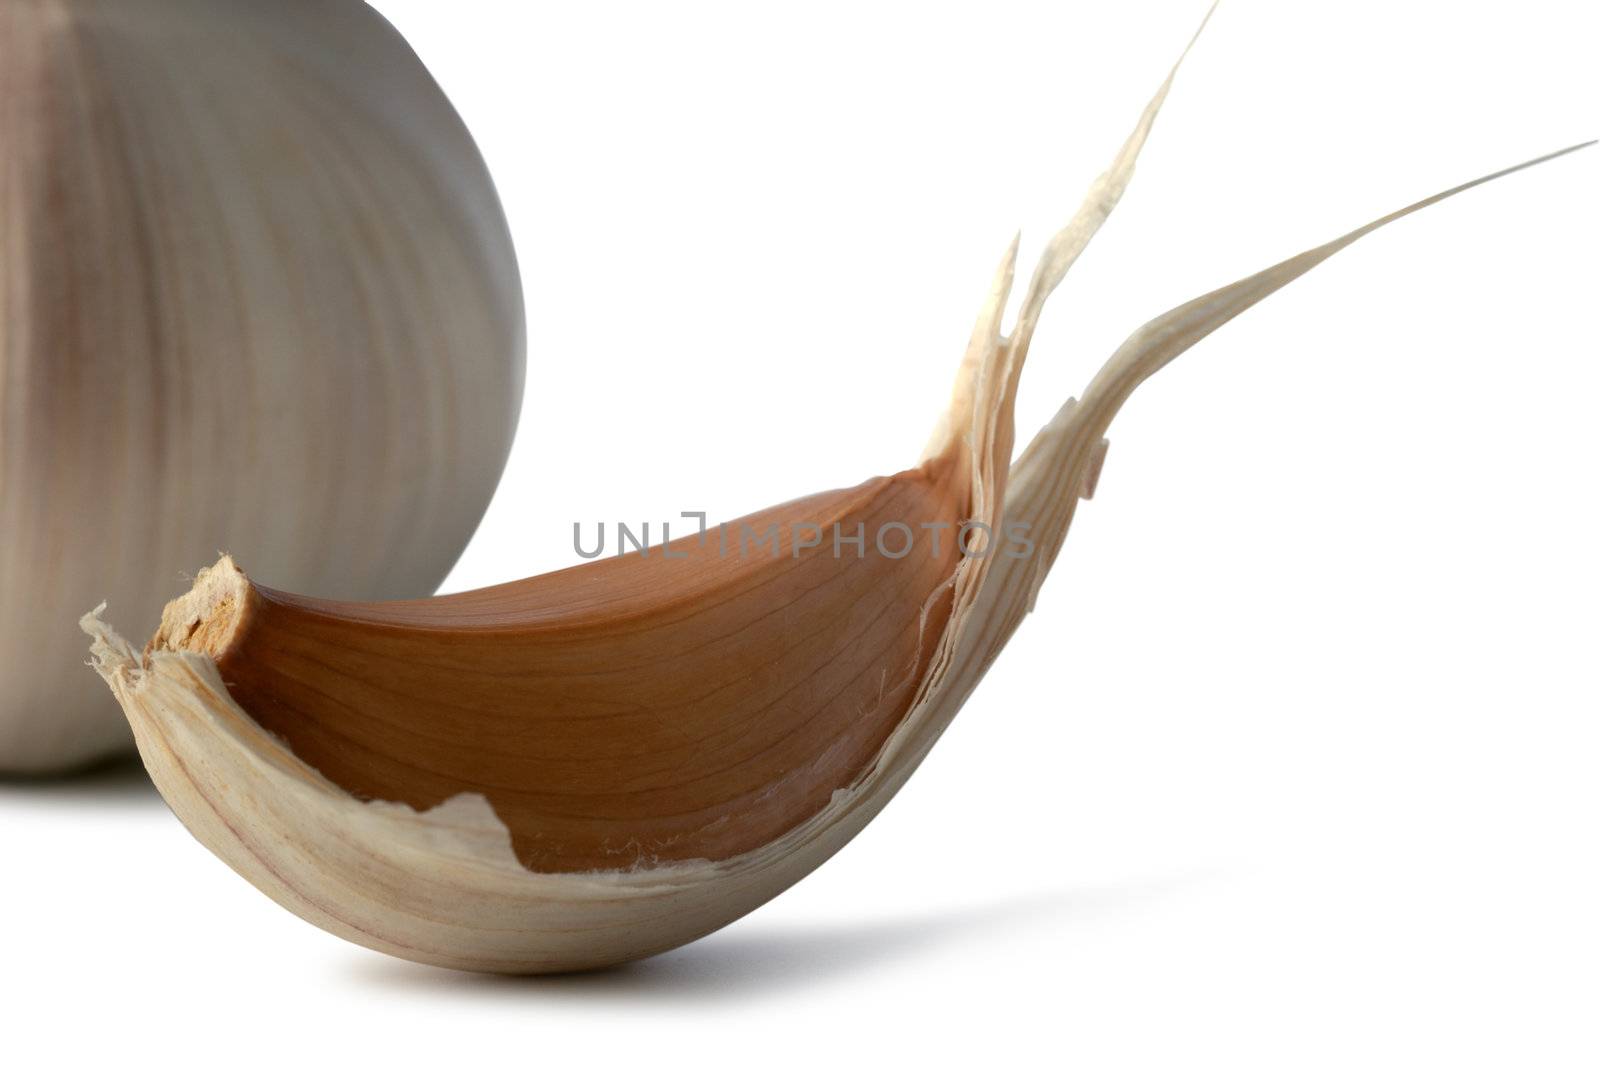 Garlic. A head of garlic isolated on a white background